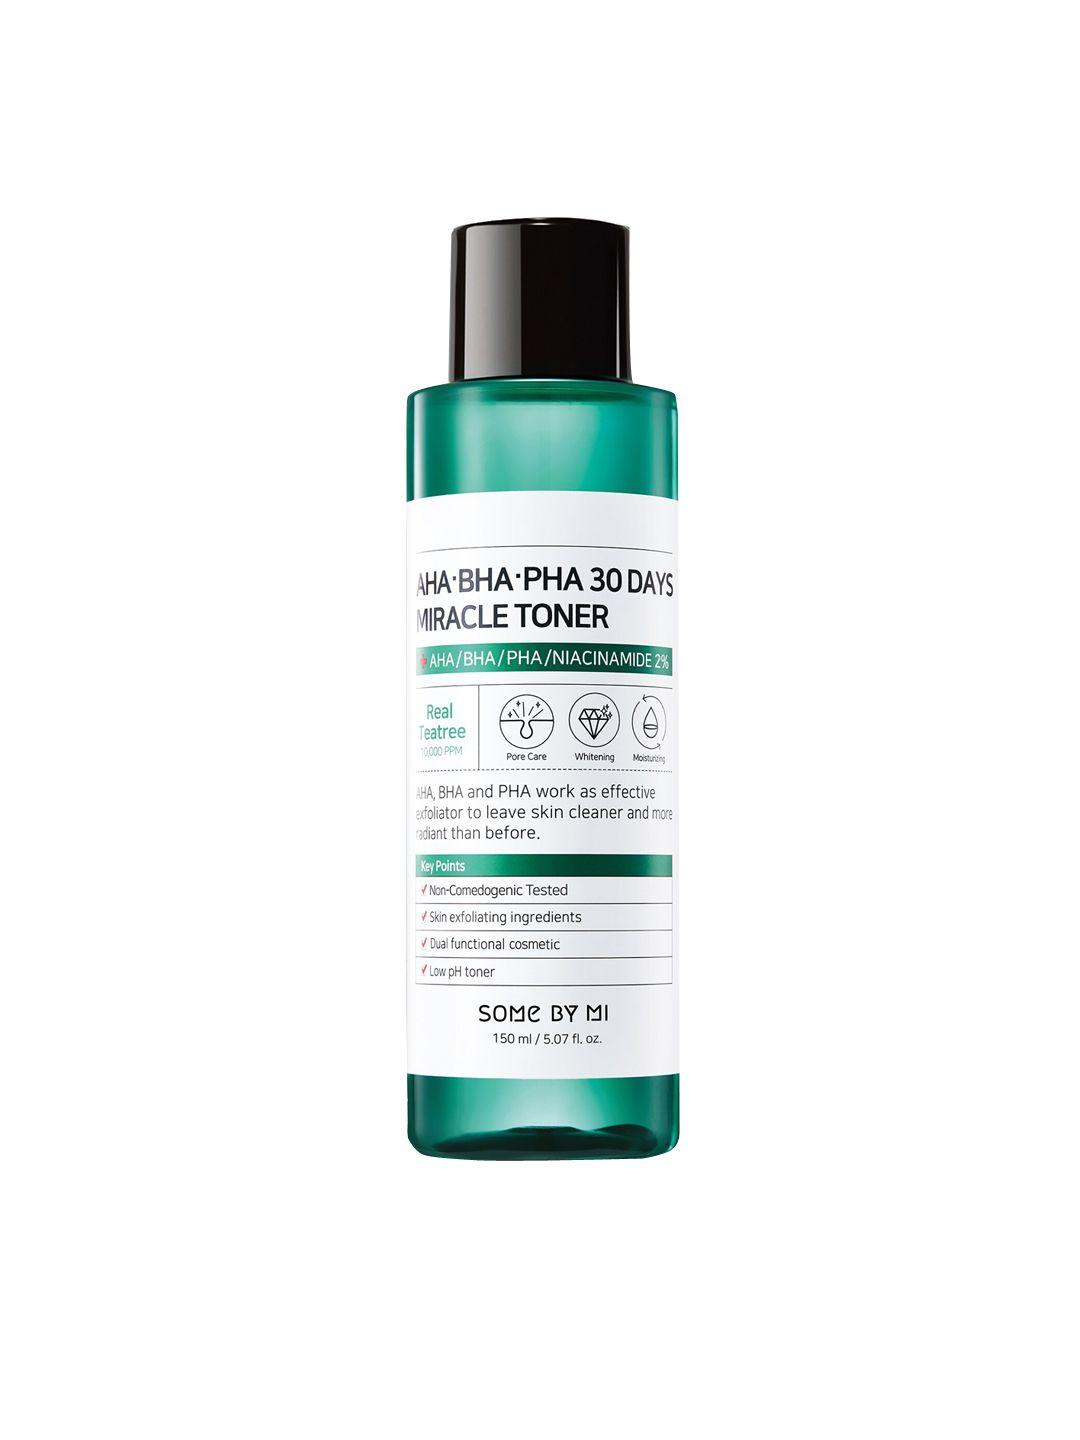 some by mi aha-bha-pha 30 days miracle toner for pore care - 150 ml